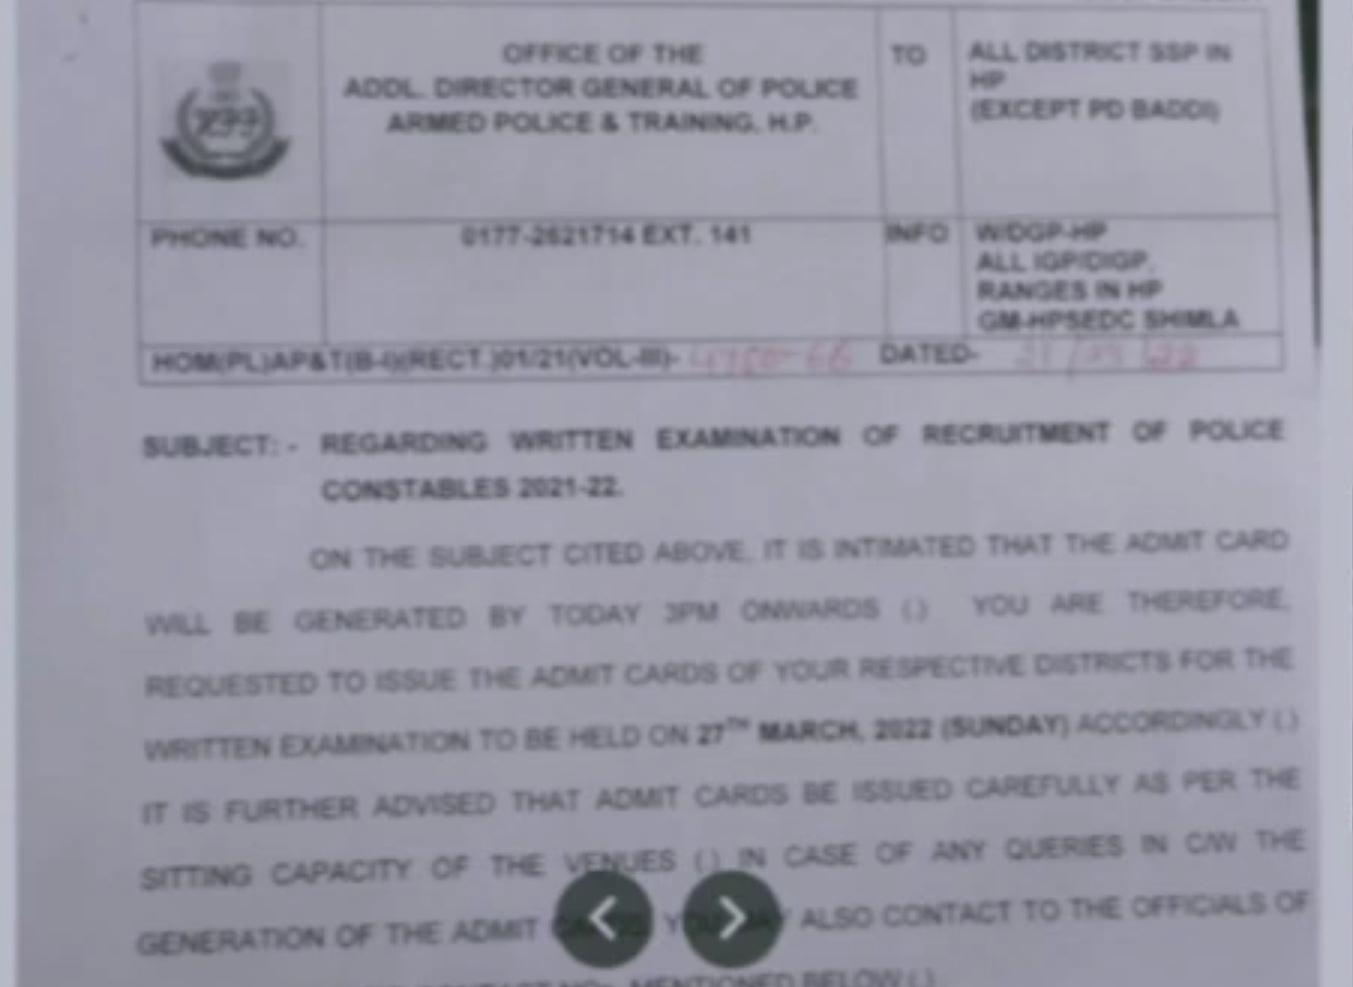 Hp police constable admit card